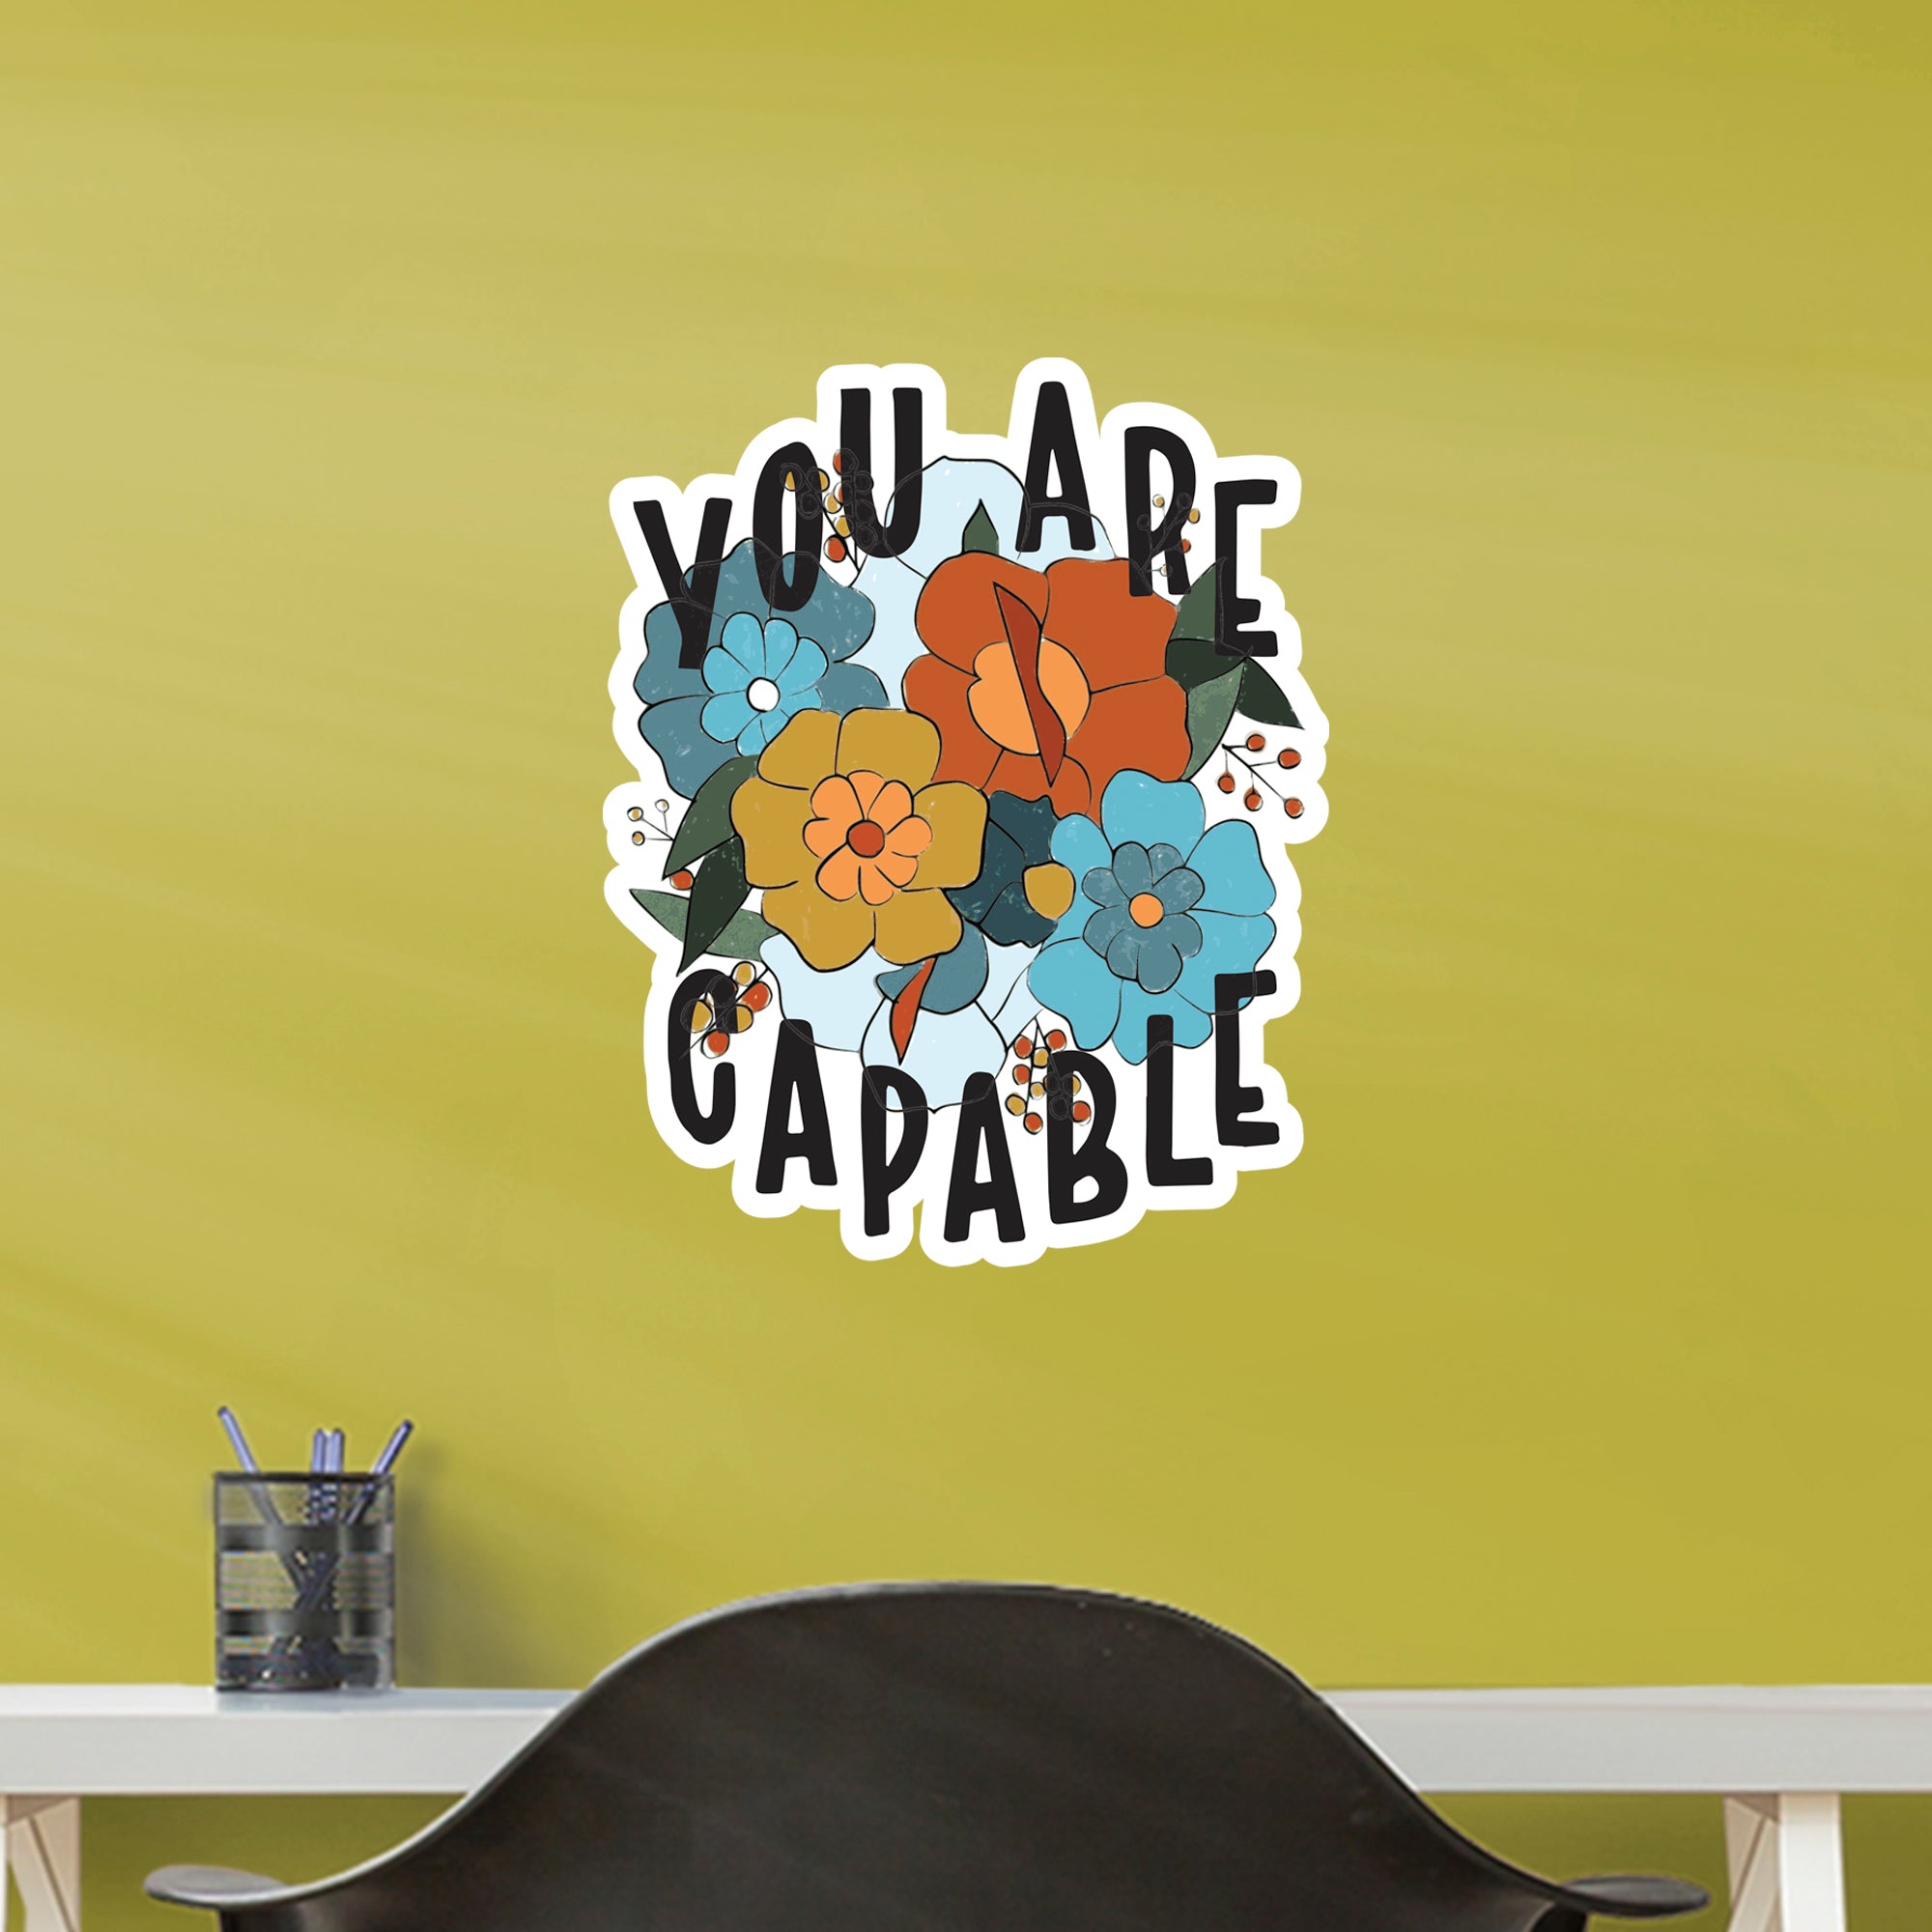 You Are Capable - Officially Licensed Big Moods Removable Wall Decal Large by Fathead | Vinyl